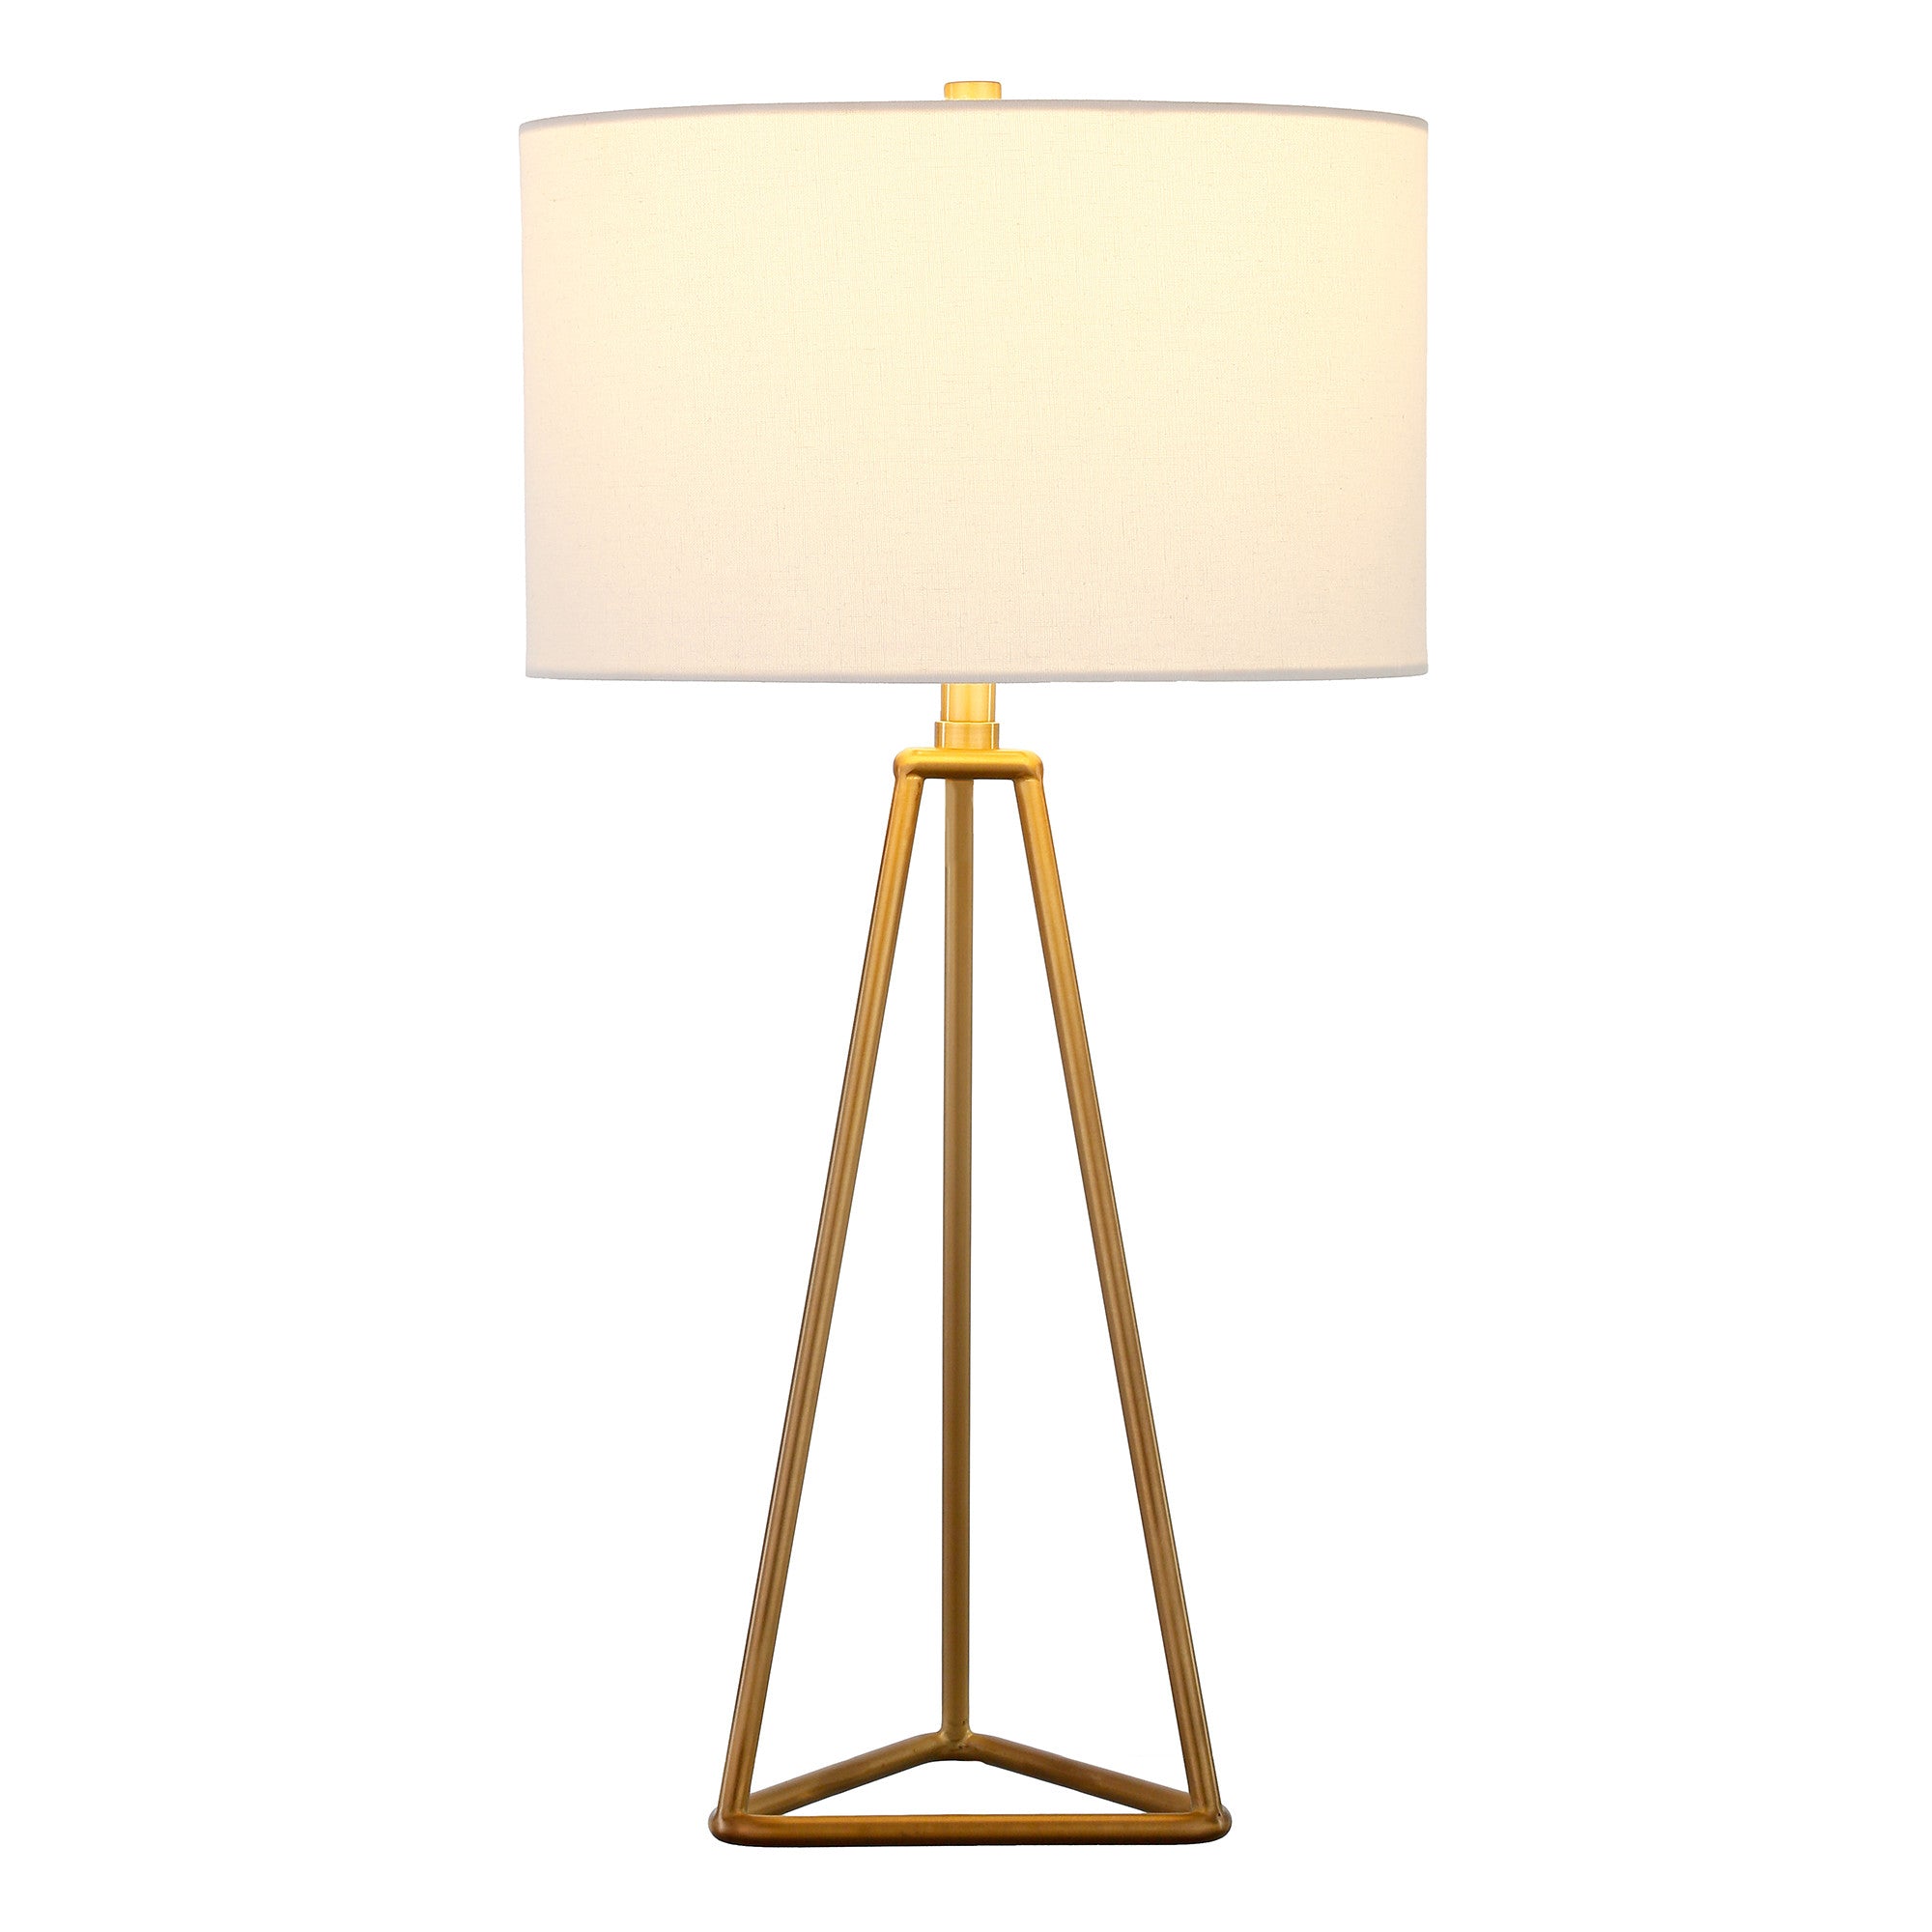 26" Gold Metal Table Lamp With White Drum Shade